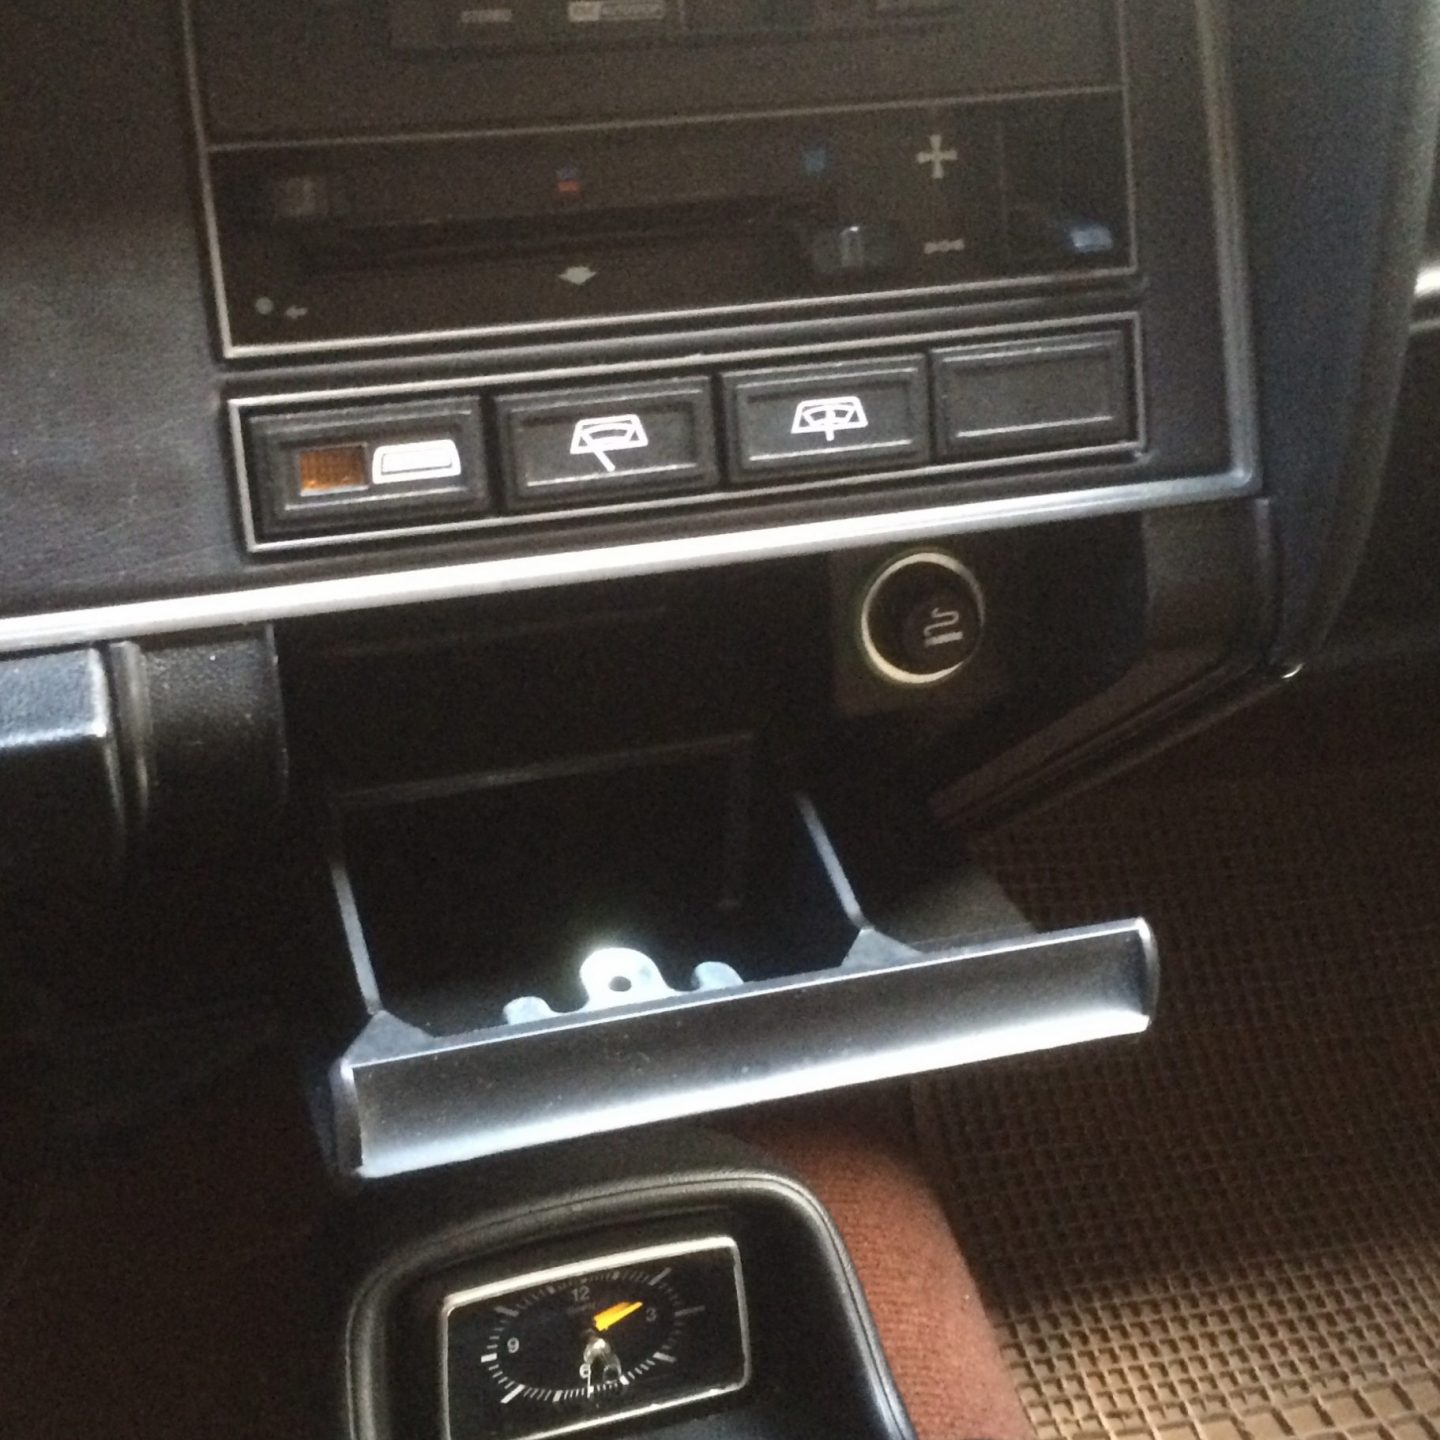 Why don’t new cars have ashtrays?